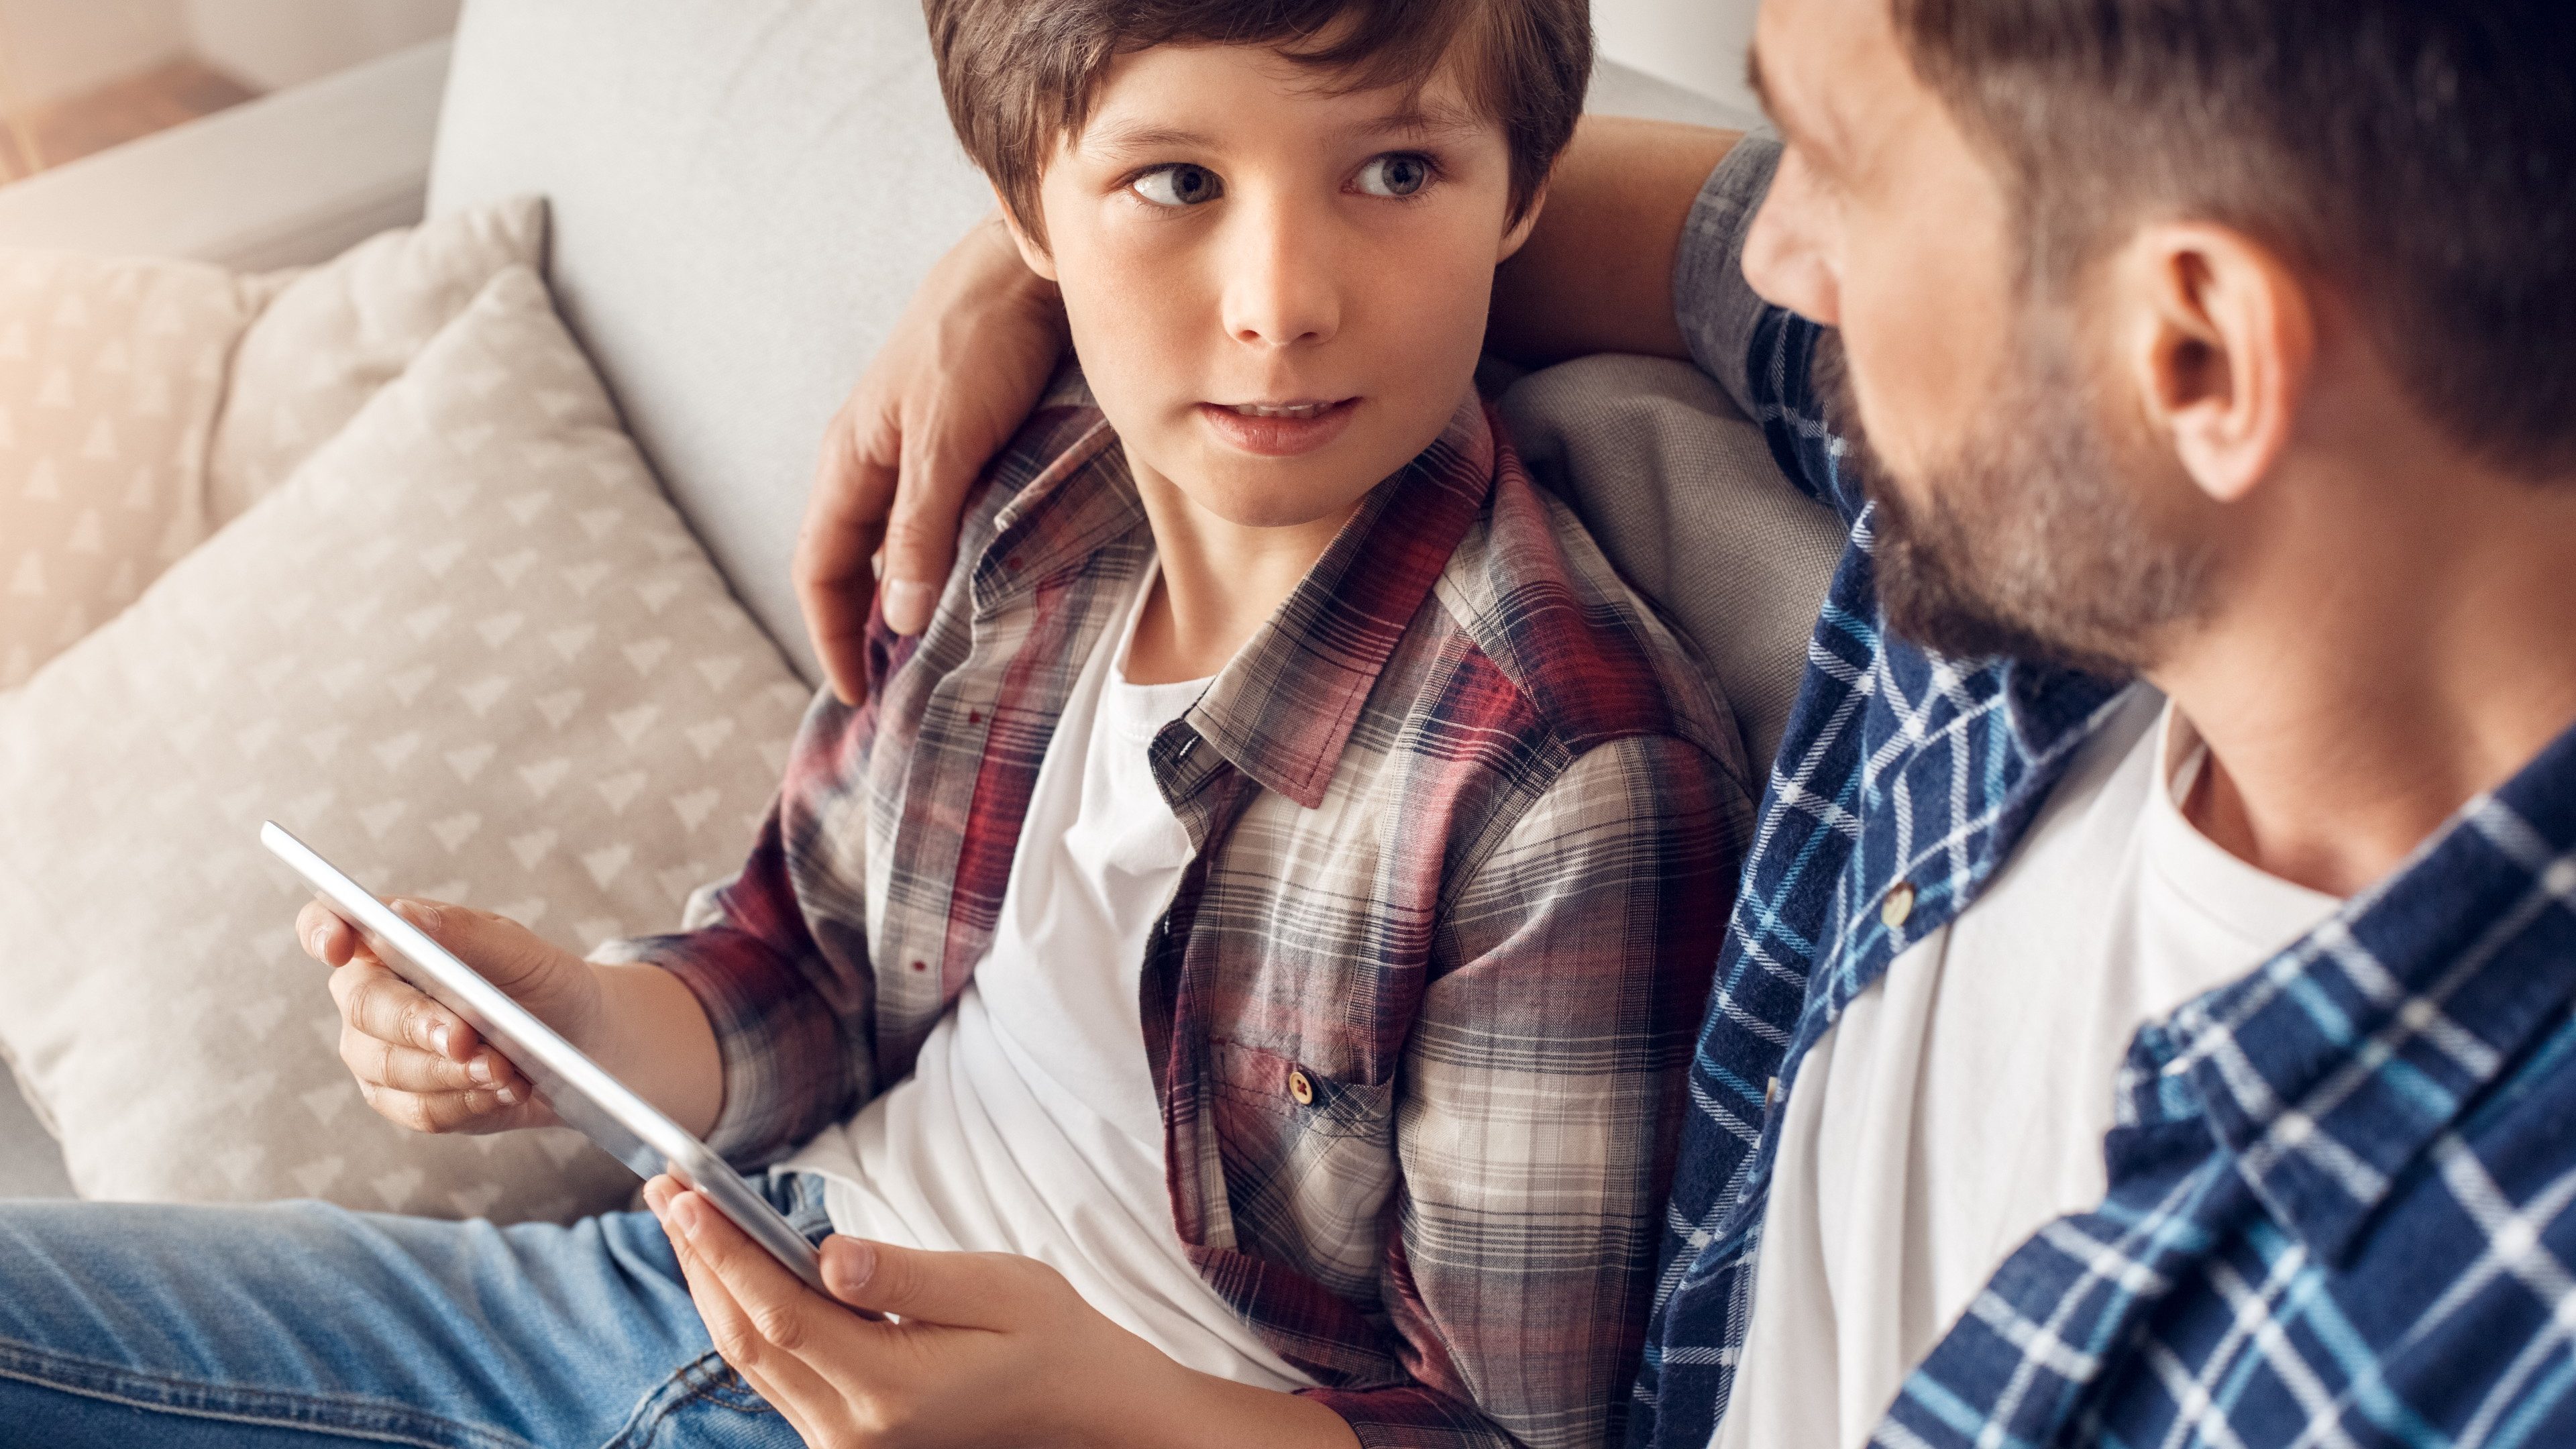 Father and little son together at home sitting on sofa dad hugging boy holding digital tablet looking at each other serious close-up